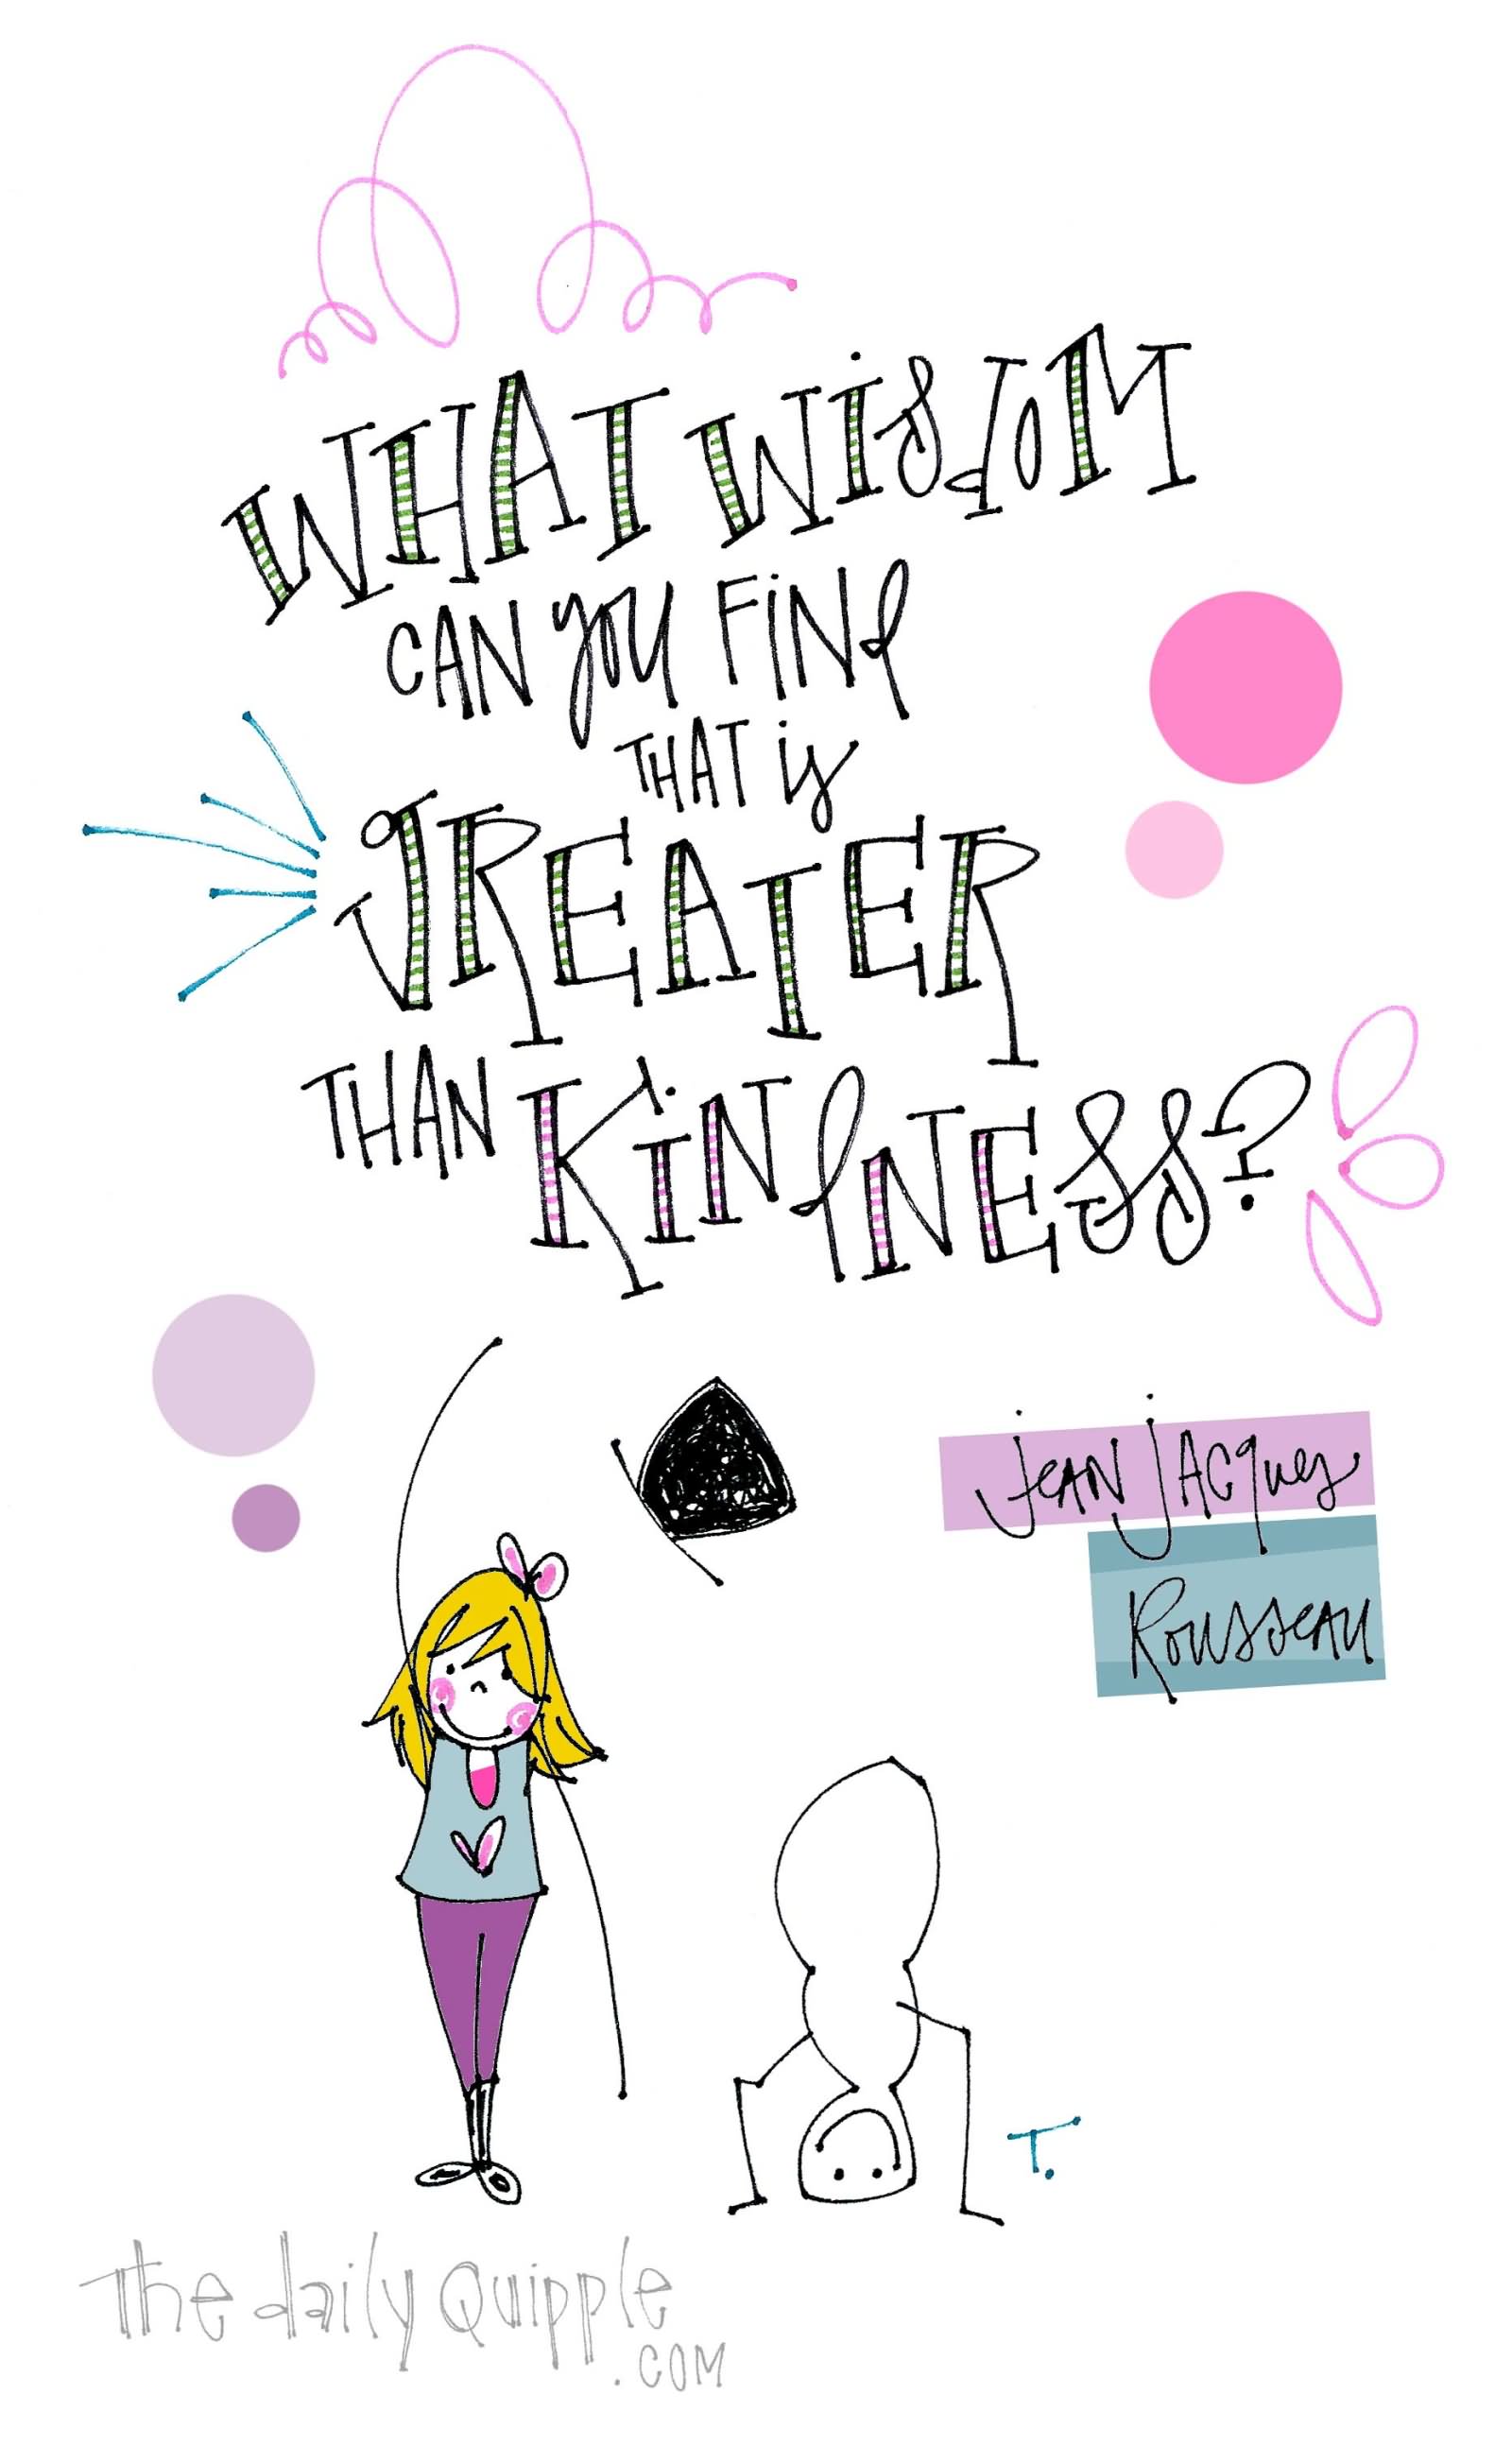 What wisdom can you find that is greater than kindness